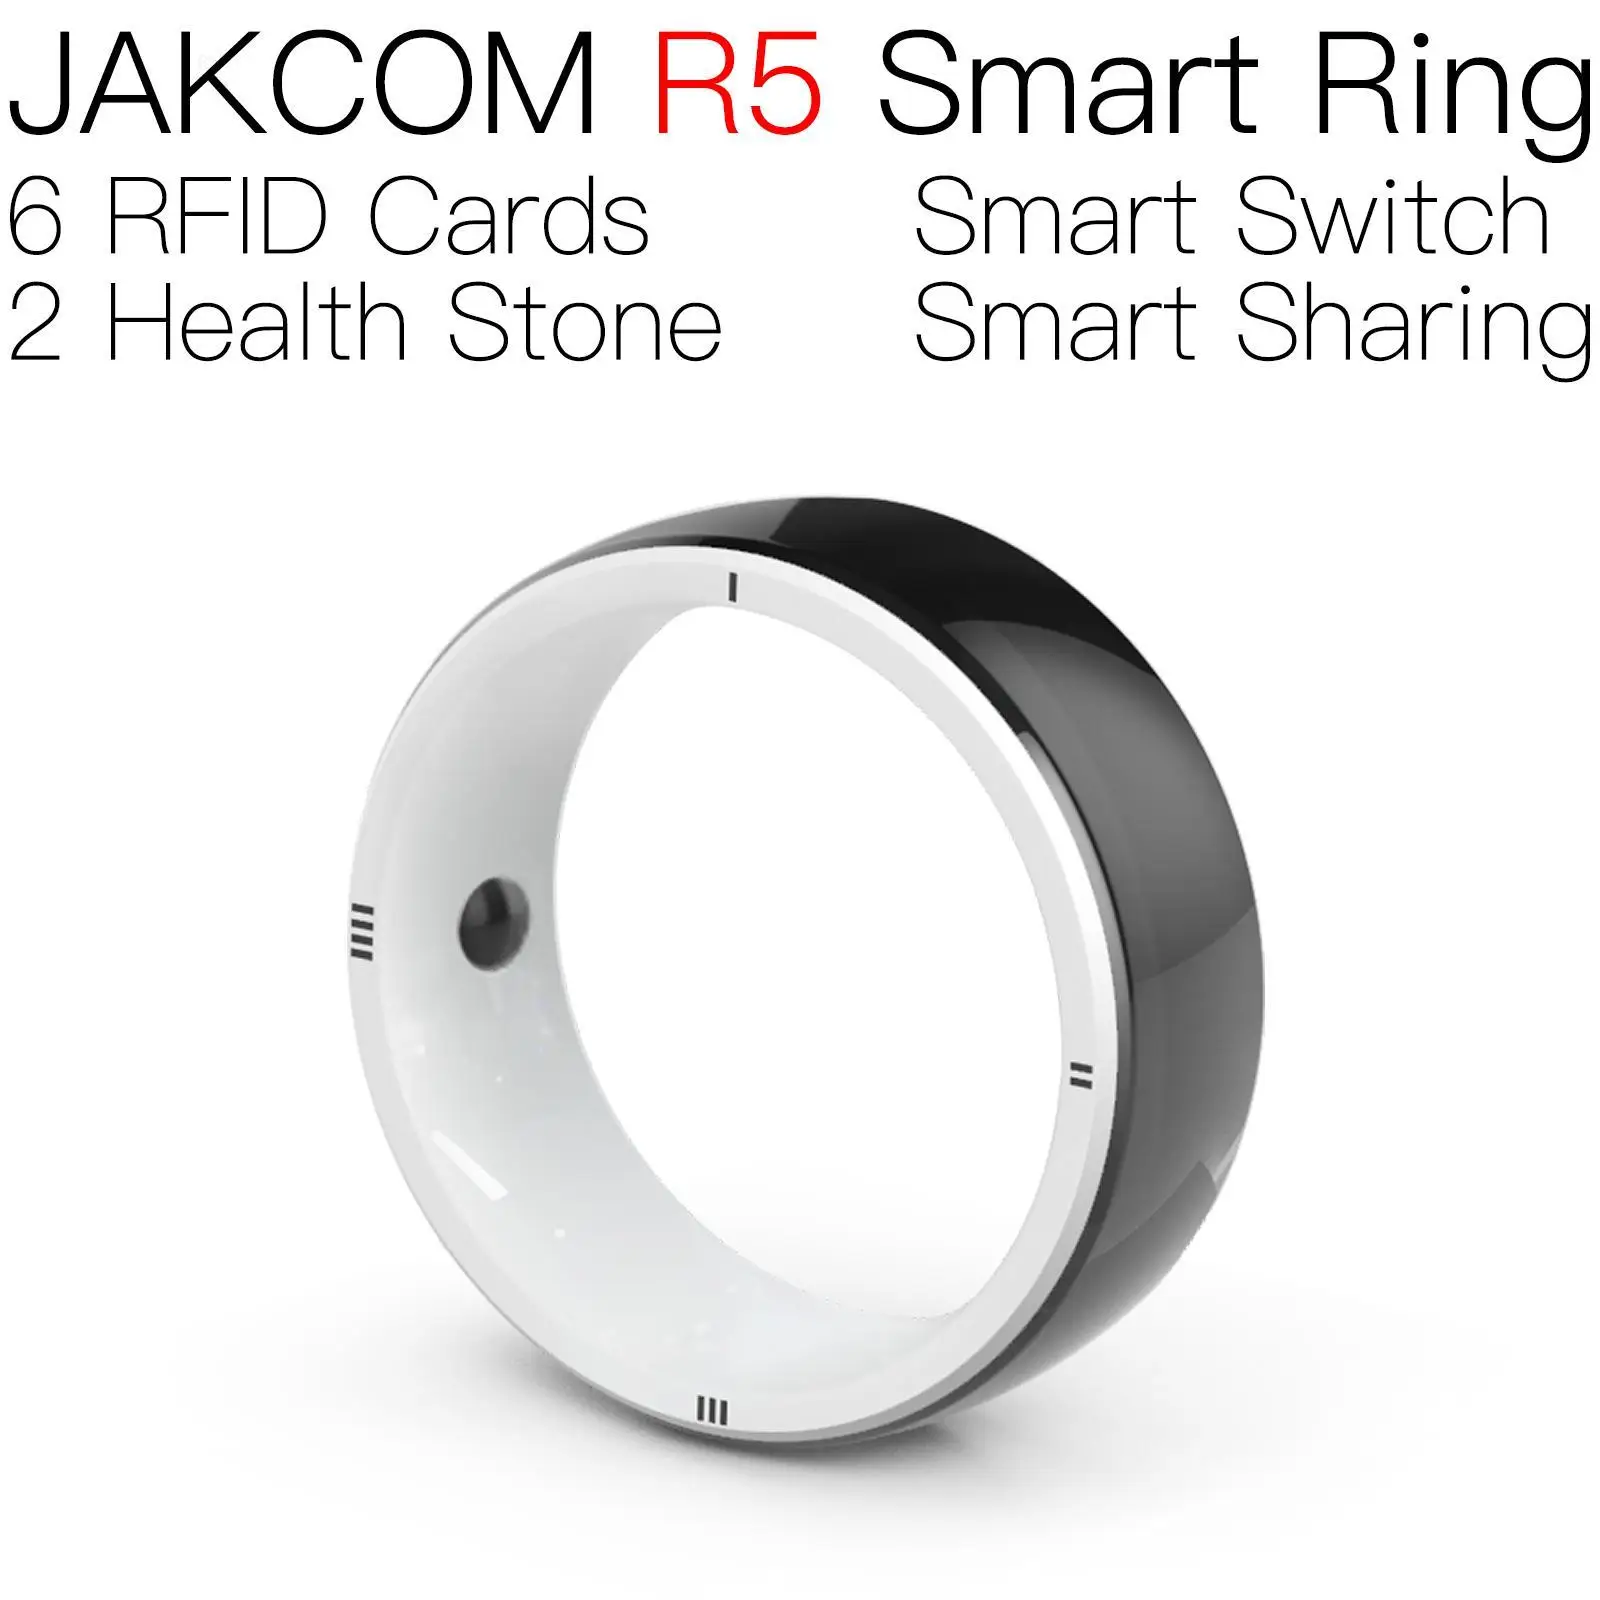 

JAKCOM R5 Smart Ring Super value as carte serie 1 new horizon rfid tag key fob nfc supported phones horizons